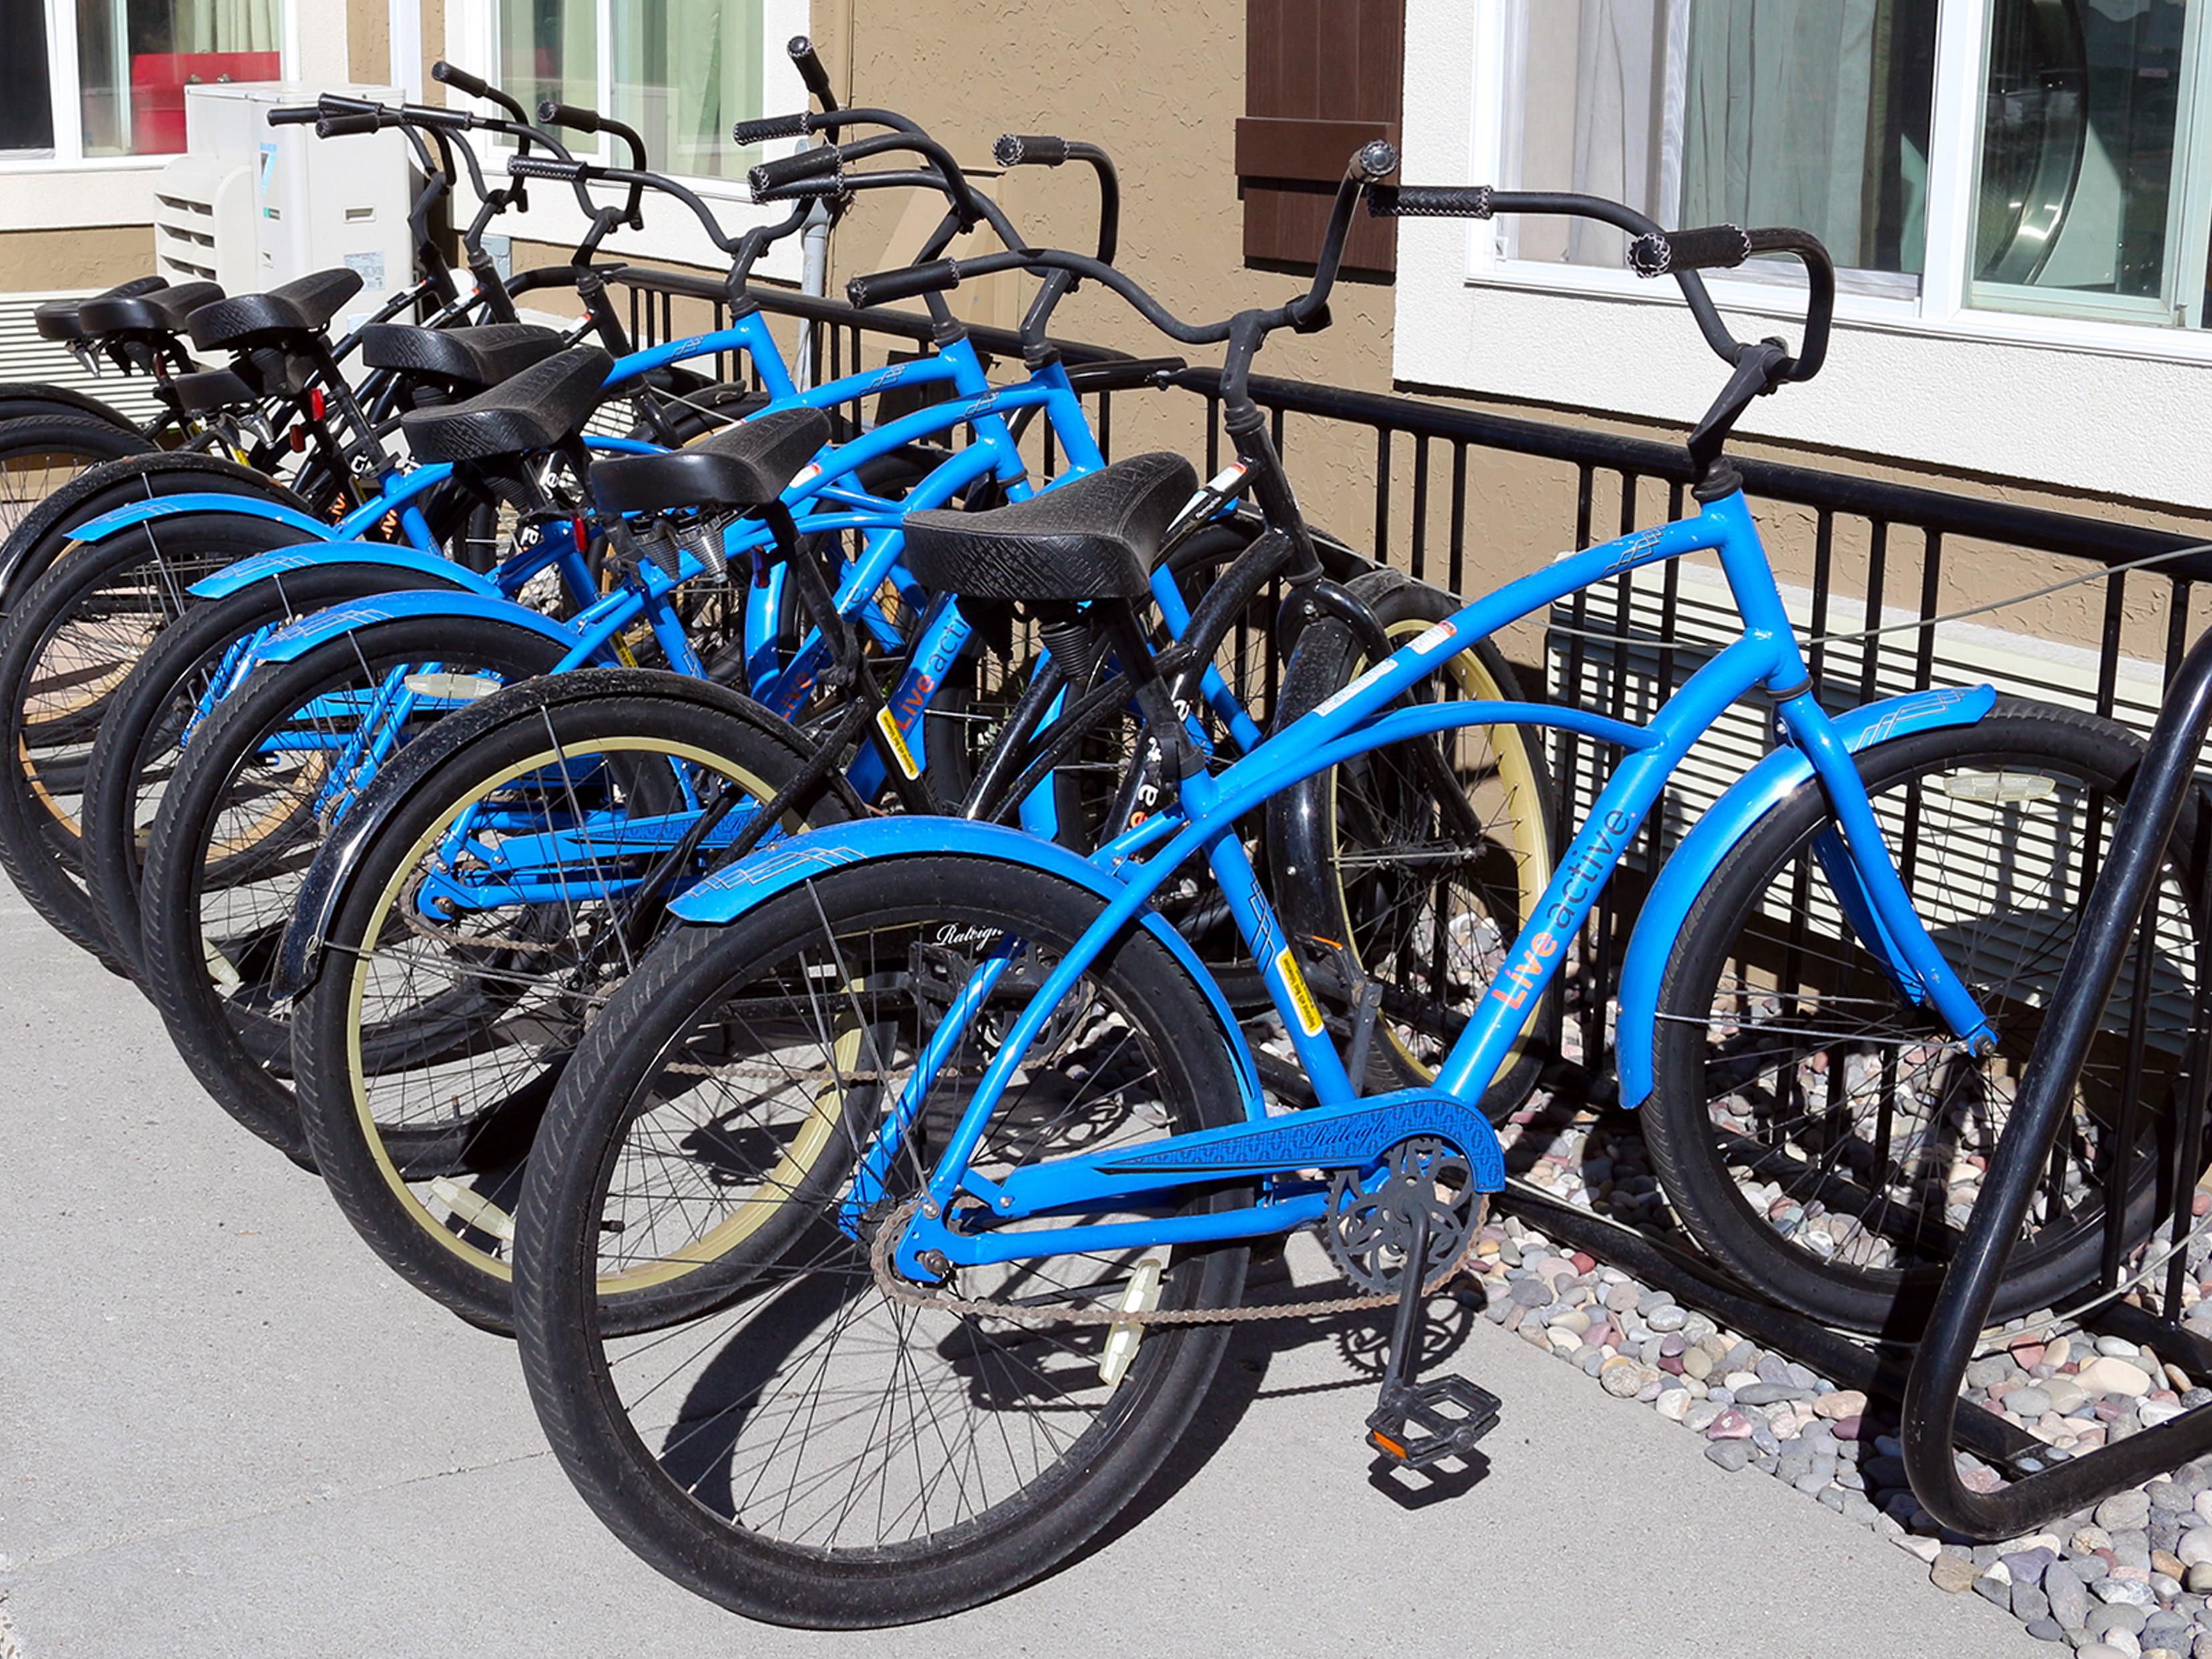 Bicycle rentals are available during the summer months at Holiday Inn West Yellowstone. Whether you are a skilled cyclist or simply wanting to re-live some memories from your childhood, riding a bike is a fun way to get some exercise and stay in shape, while also exploring some of the most beautiful scenery in West Yellowstone.